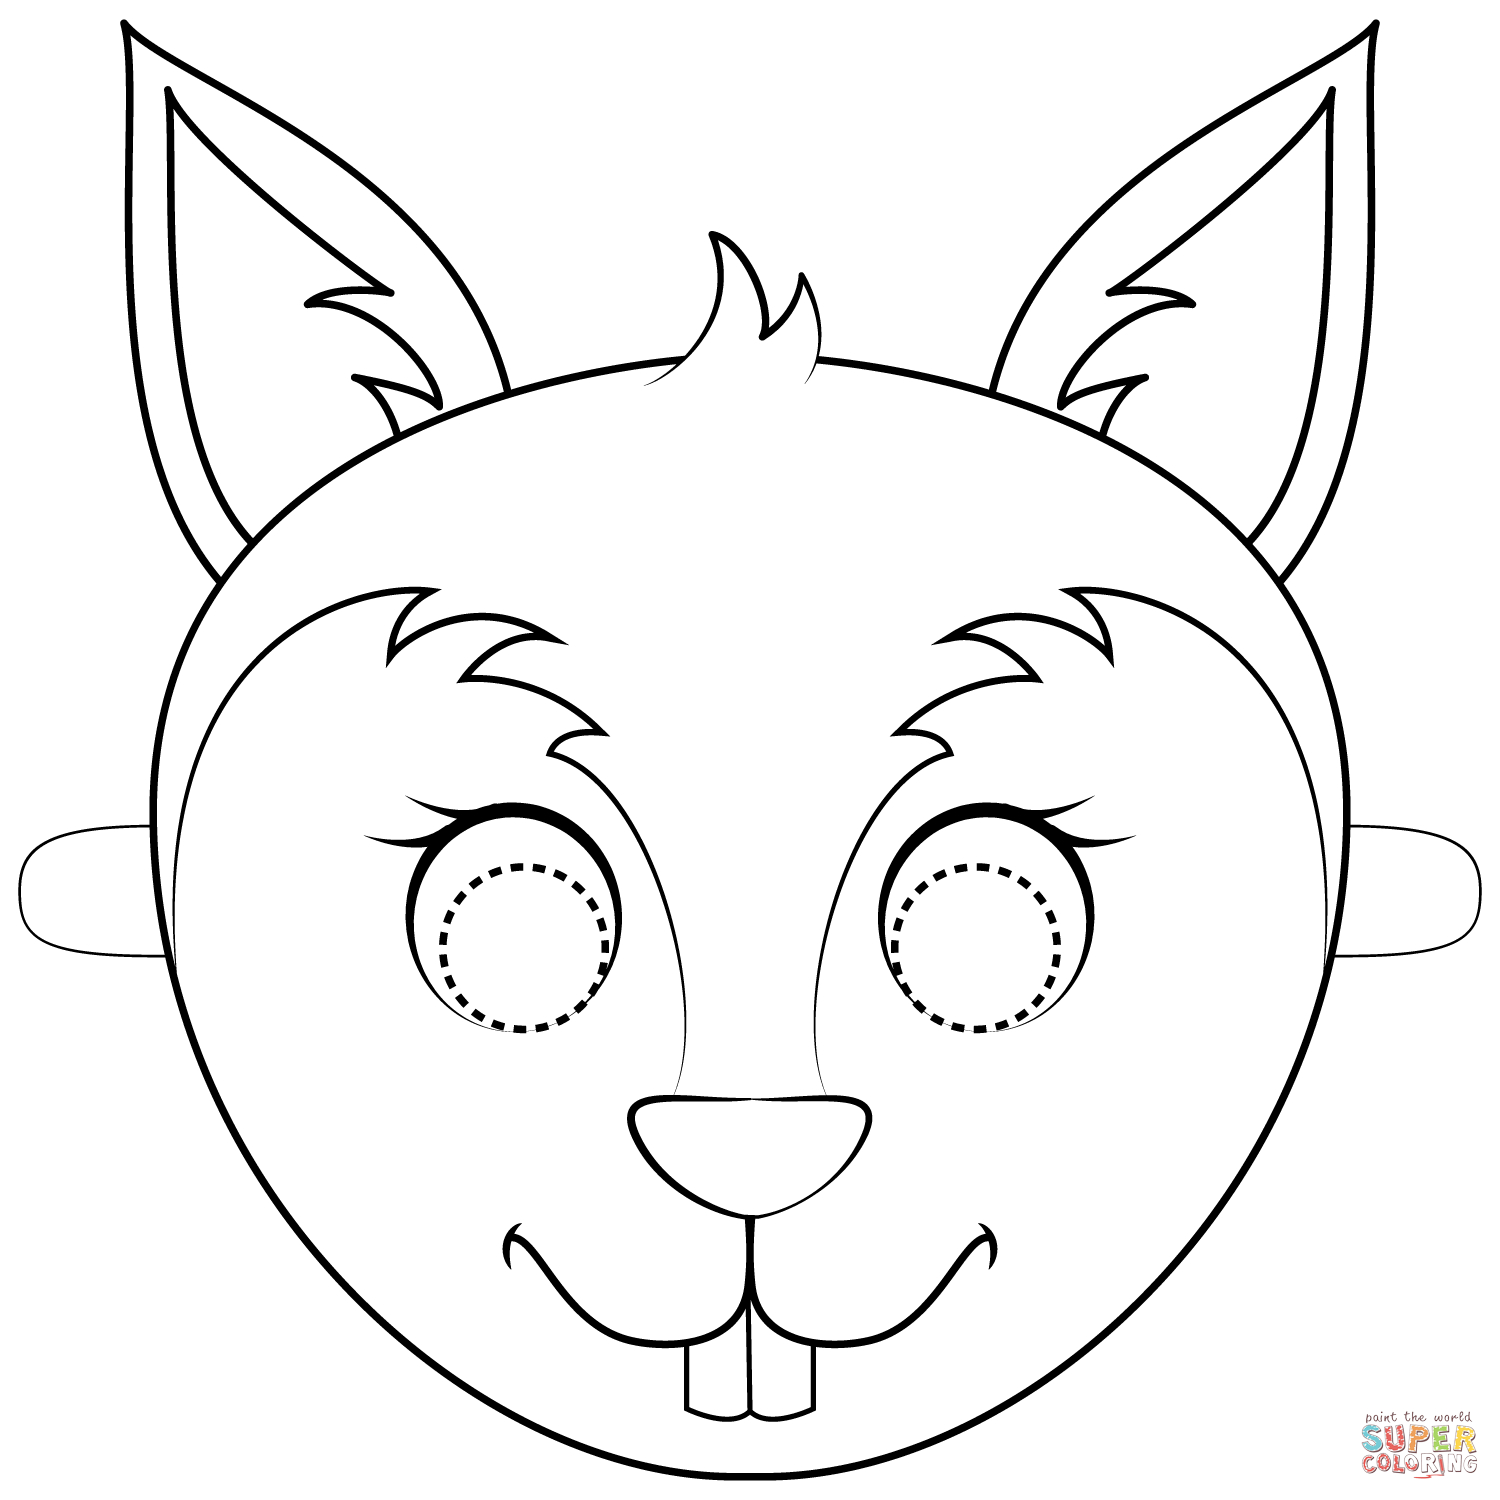 Squirrel Mask Coloring Page | Free Printable Coloring Pages - Free Printable Chipmunk Mask